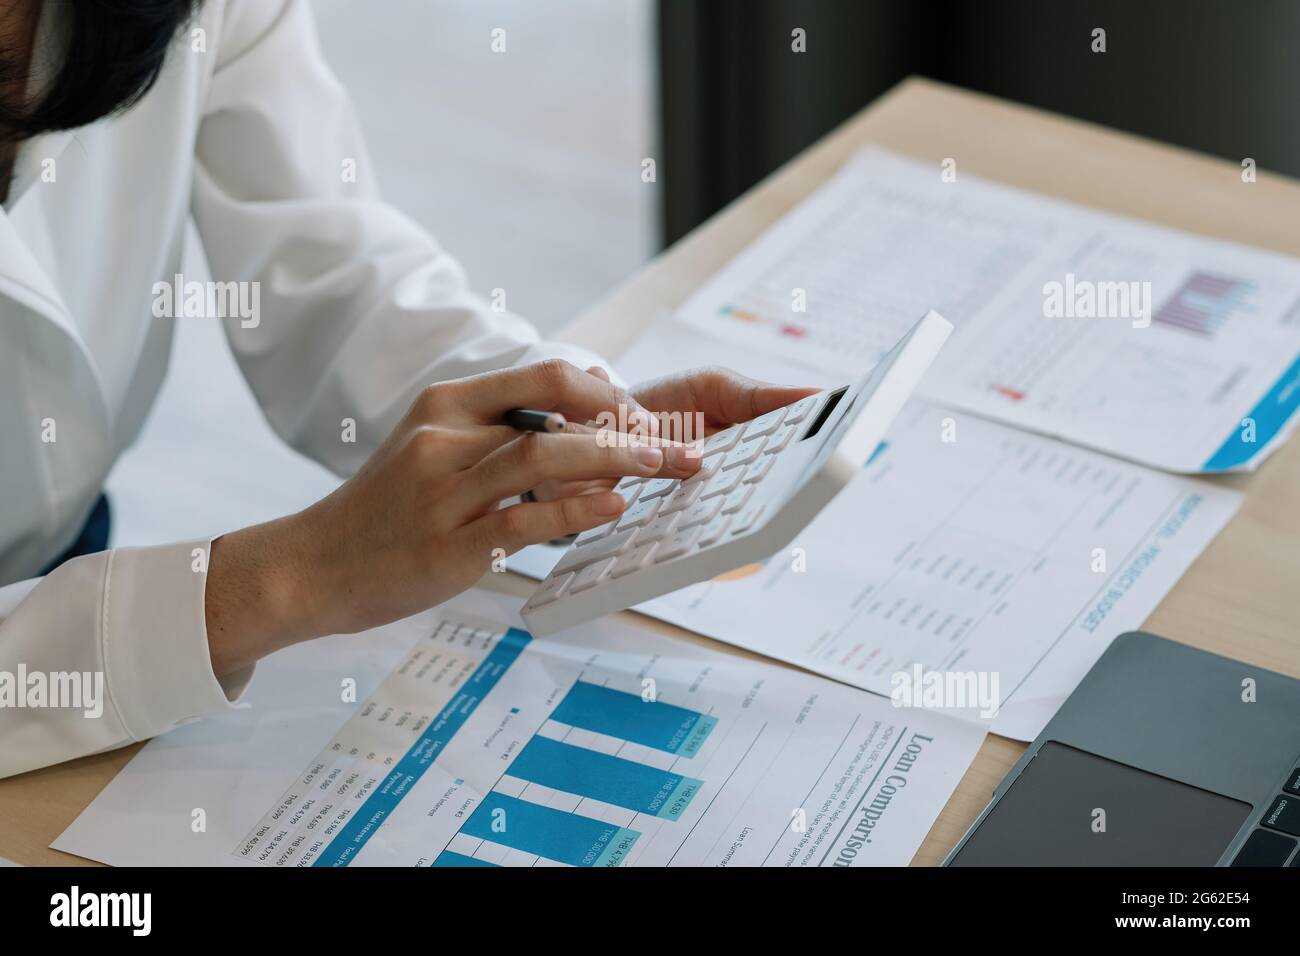 Close up busy woman using calculator, renter checking bills, planning budget, sitting at desk with financial documents and receipts, accounting Stock Photo